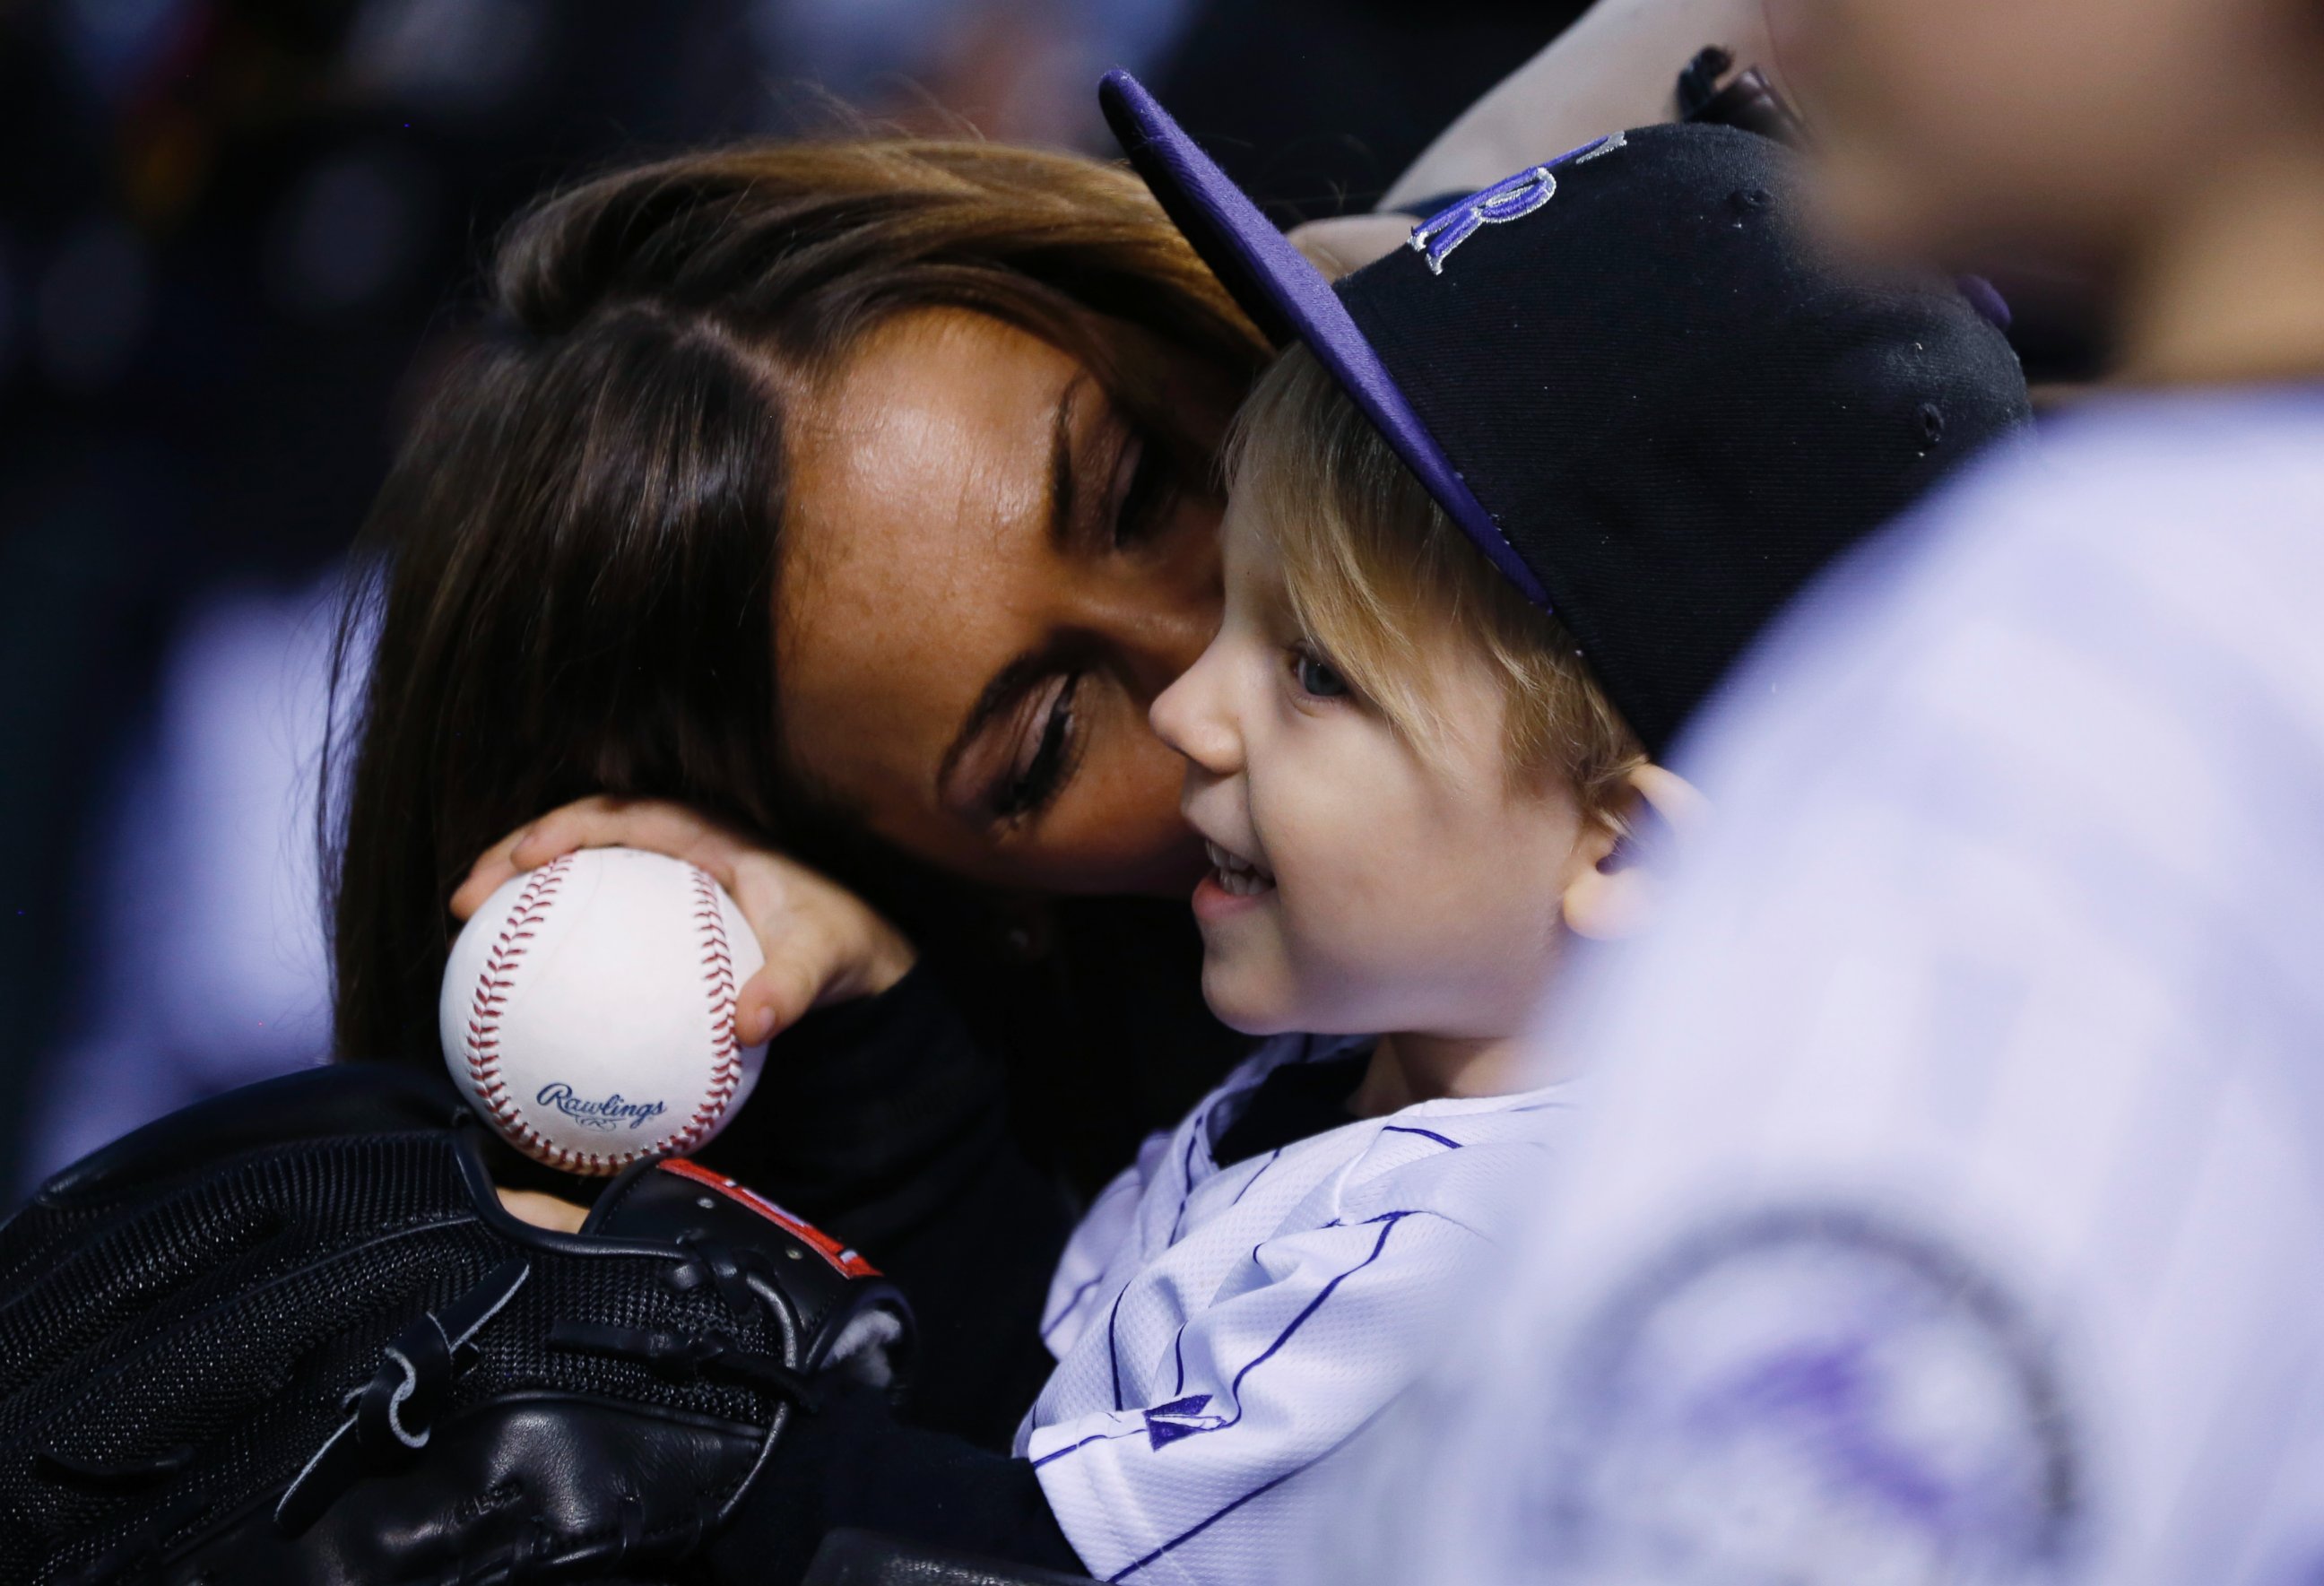 PHOTO: Nicole Axford, back, kisses her 2-year-old son, Jameson, as he waits to throw out the ceremonial first pitch before the Colorado Rockies host the Los Angeles Dodgers in a baseball game Friday, May 8, 2015, in Denver.